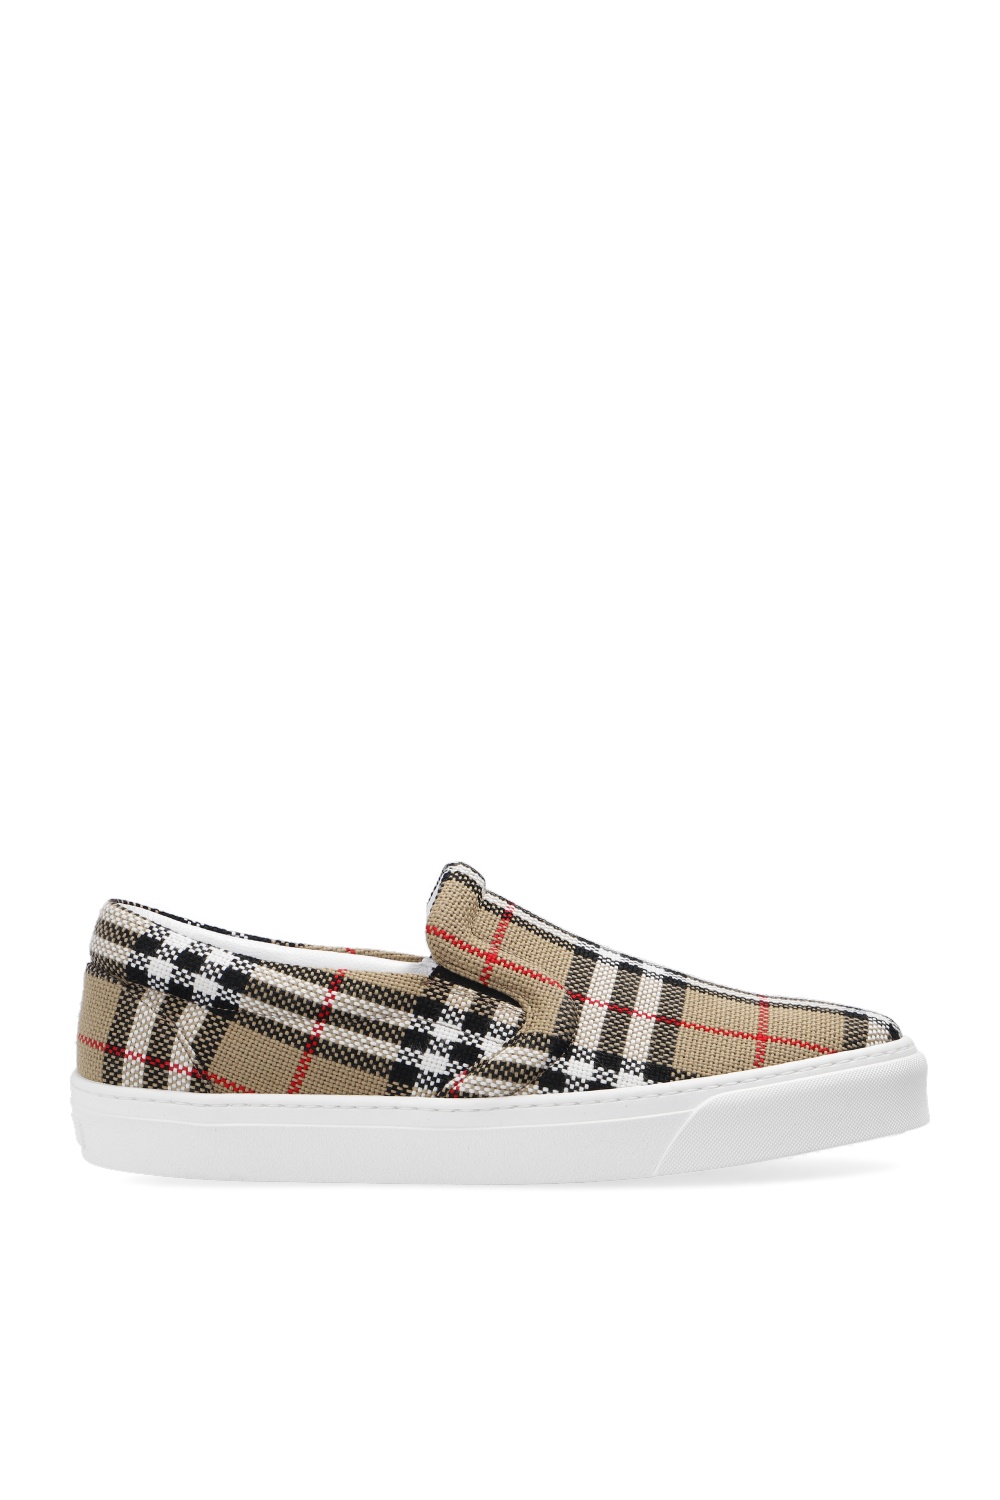 Burberry Patterned slip-on shoes